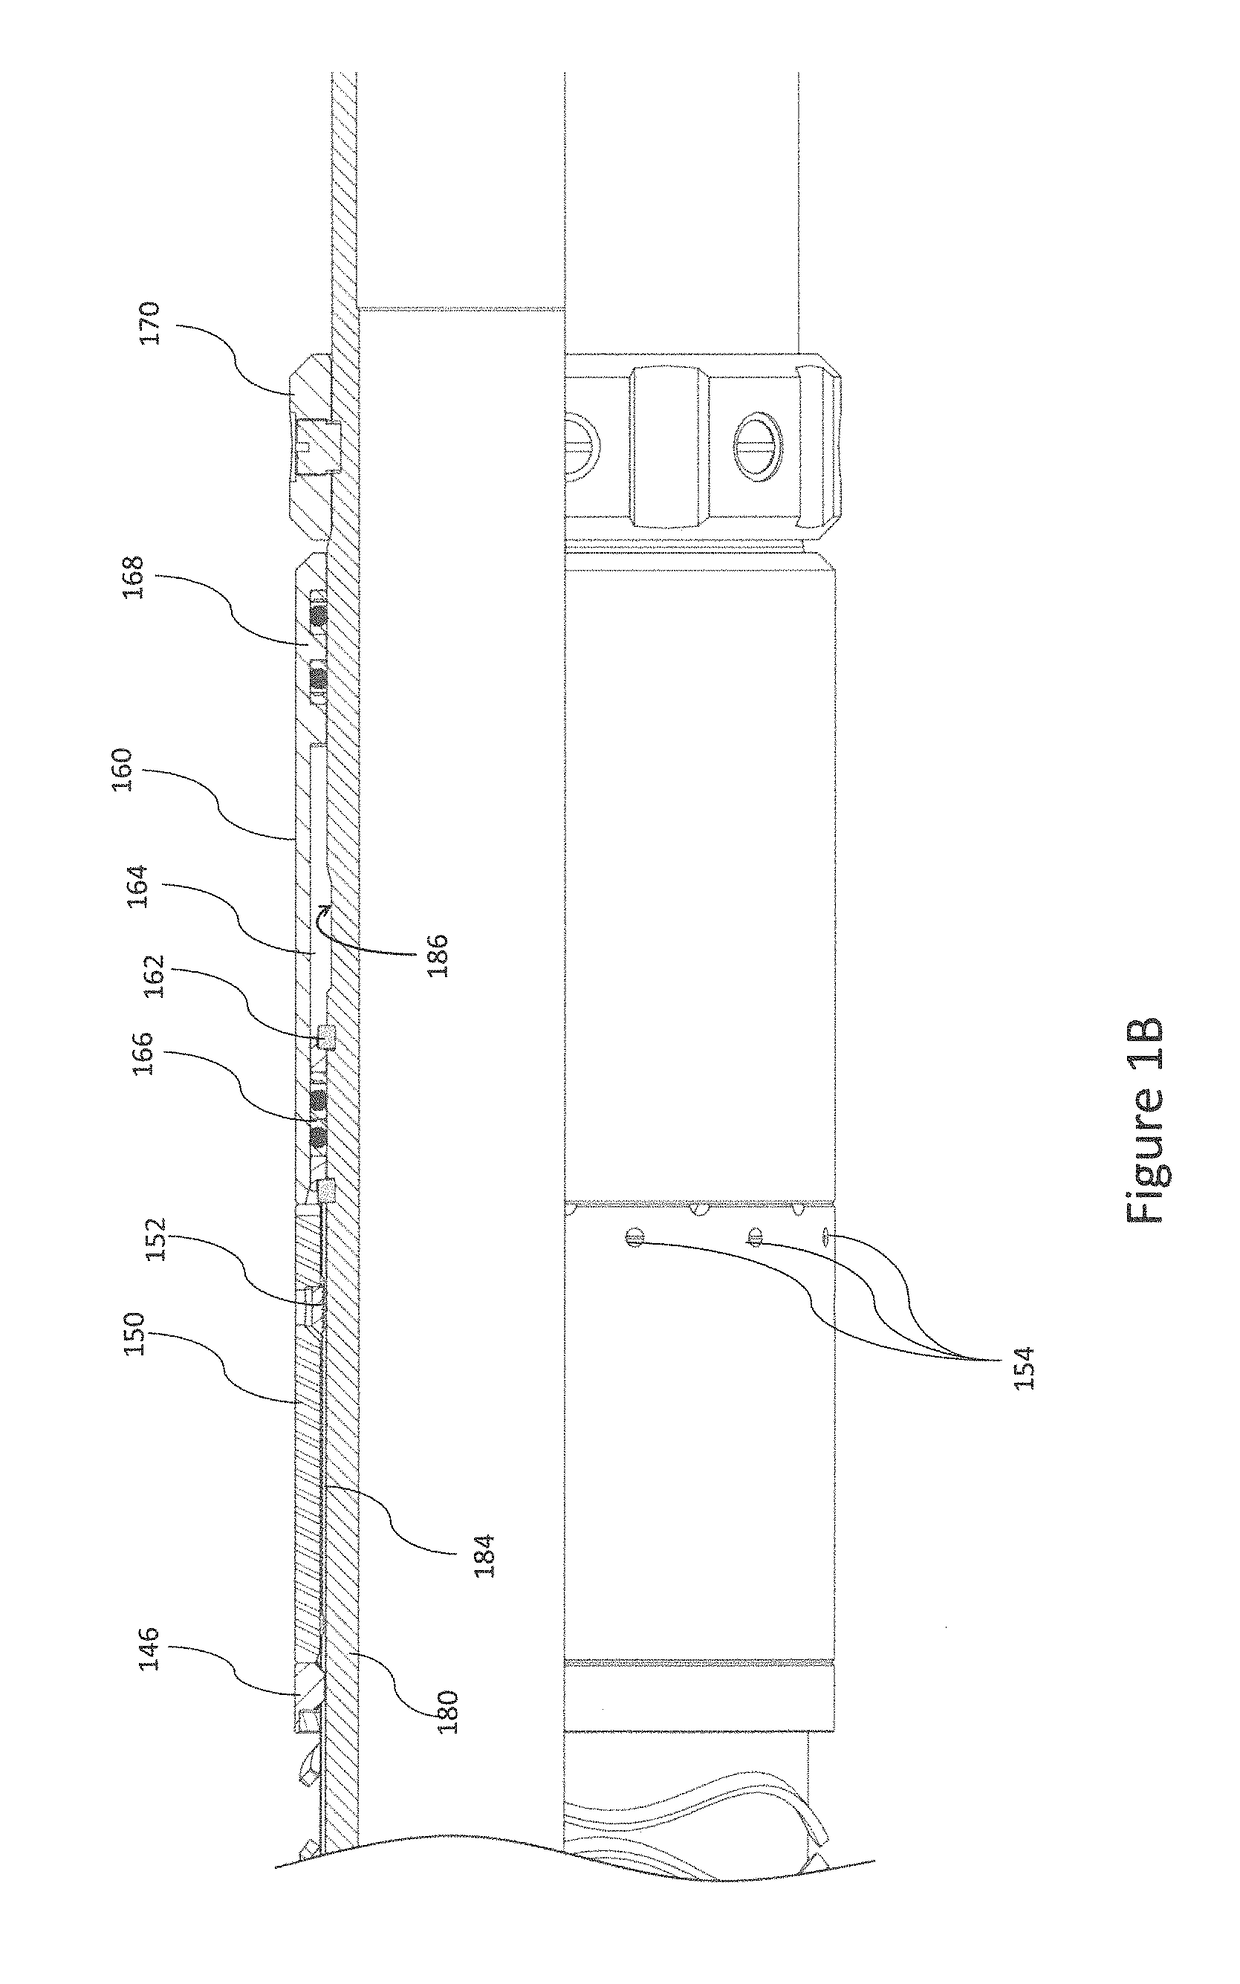 Tubing Hanger Apparatus, System and Methods